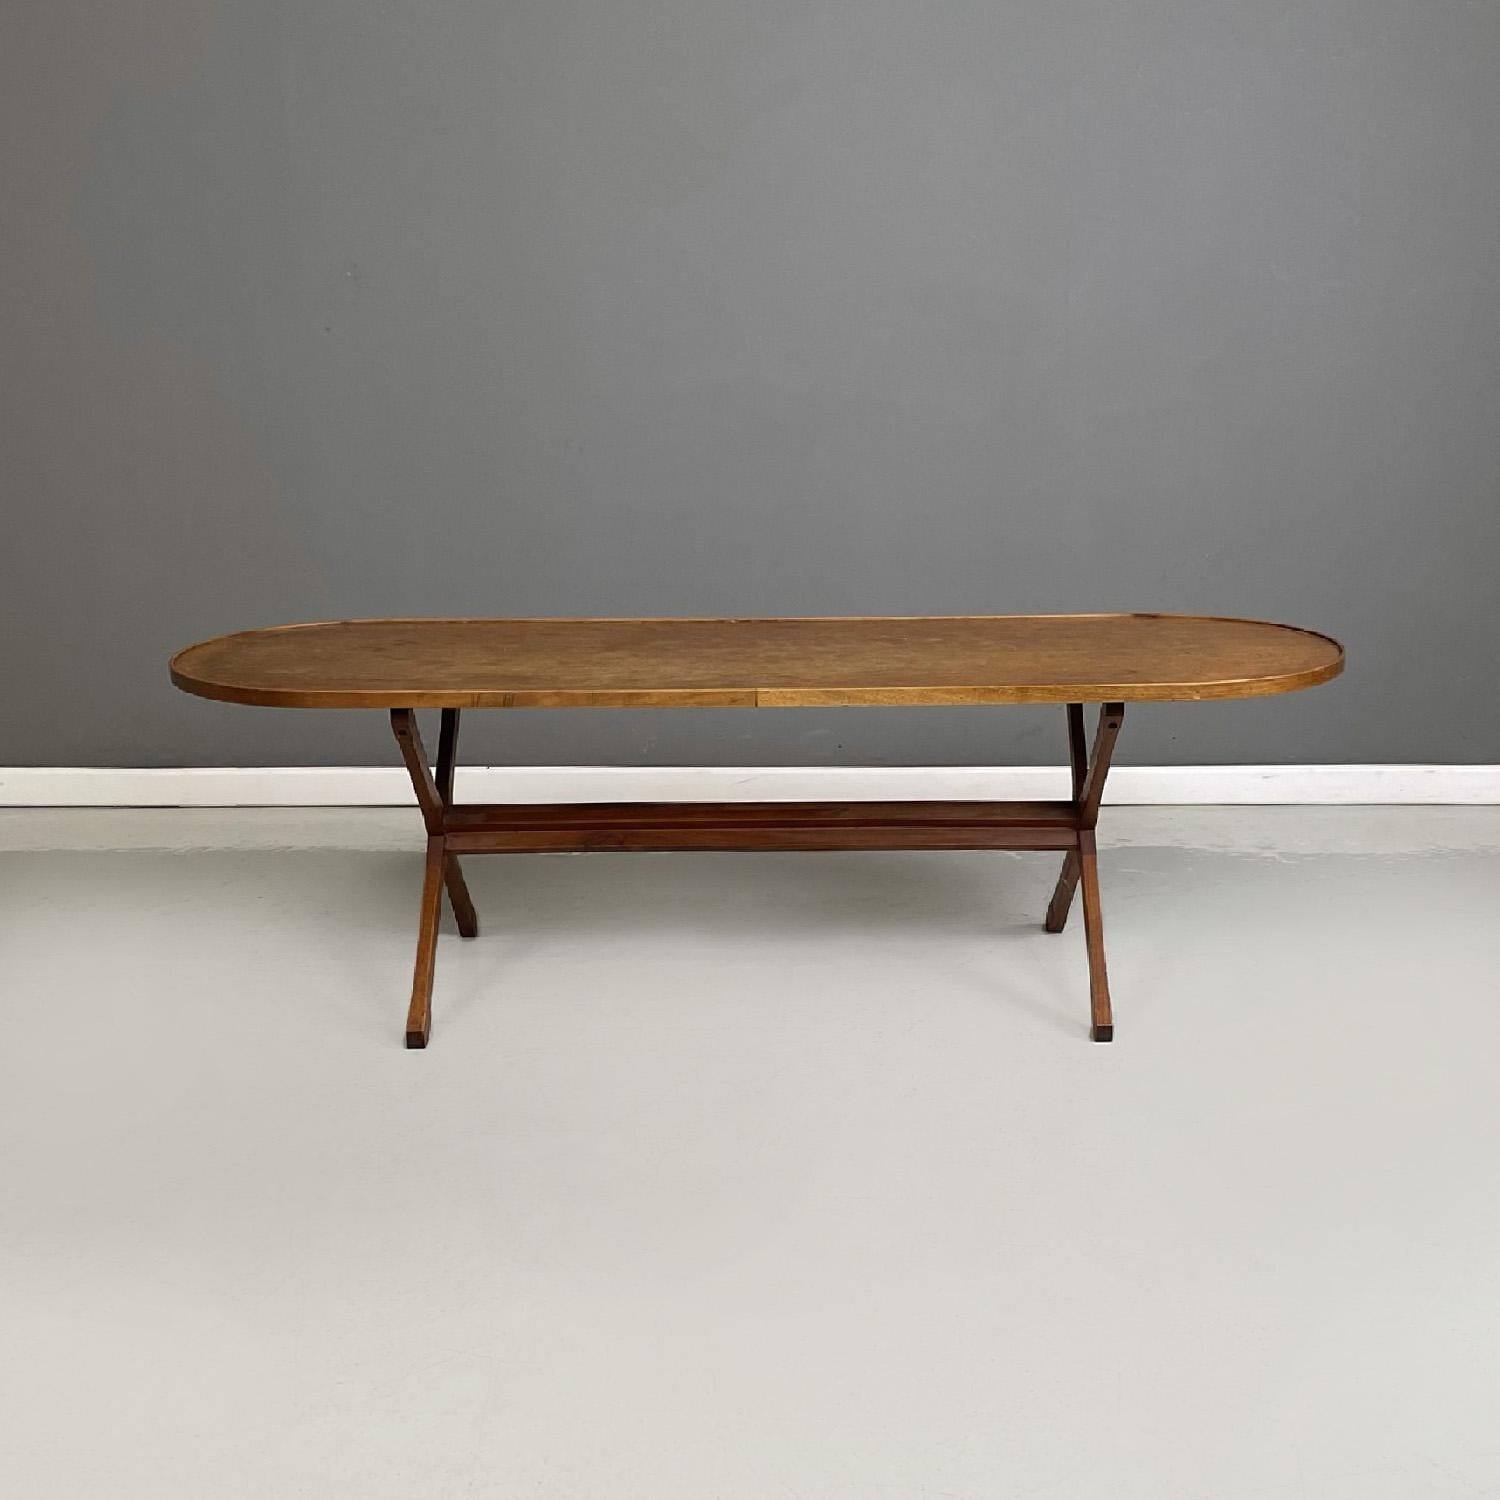  Italian mid-century modern wooden coffee table by Franco Albini e Franca Helg for Mobilia, 1960s
Oval-shaped coffee table made entirely of wood. The top has a slight border around the entire perimeter. The legs are on the sides of the top and are